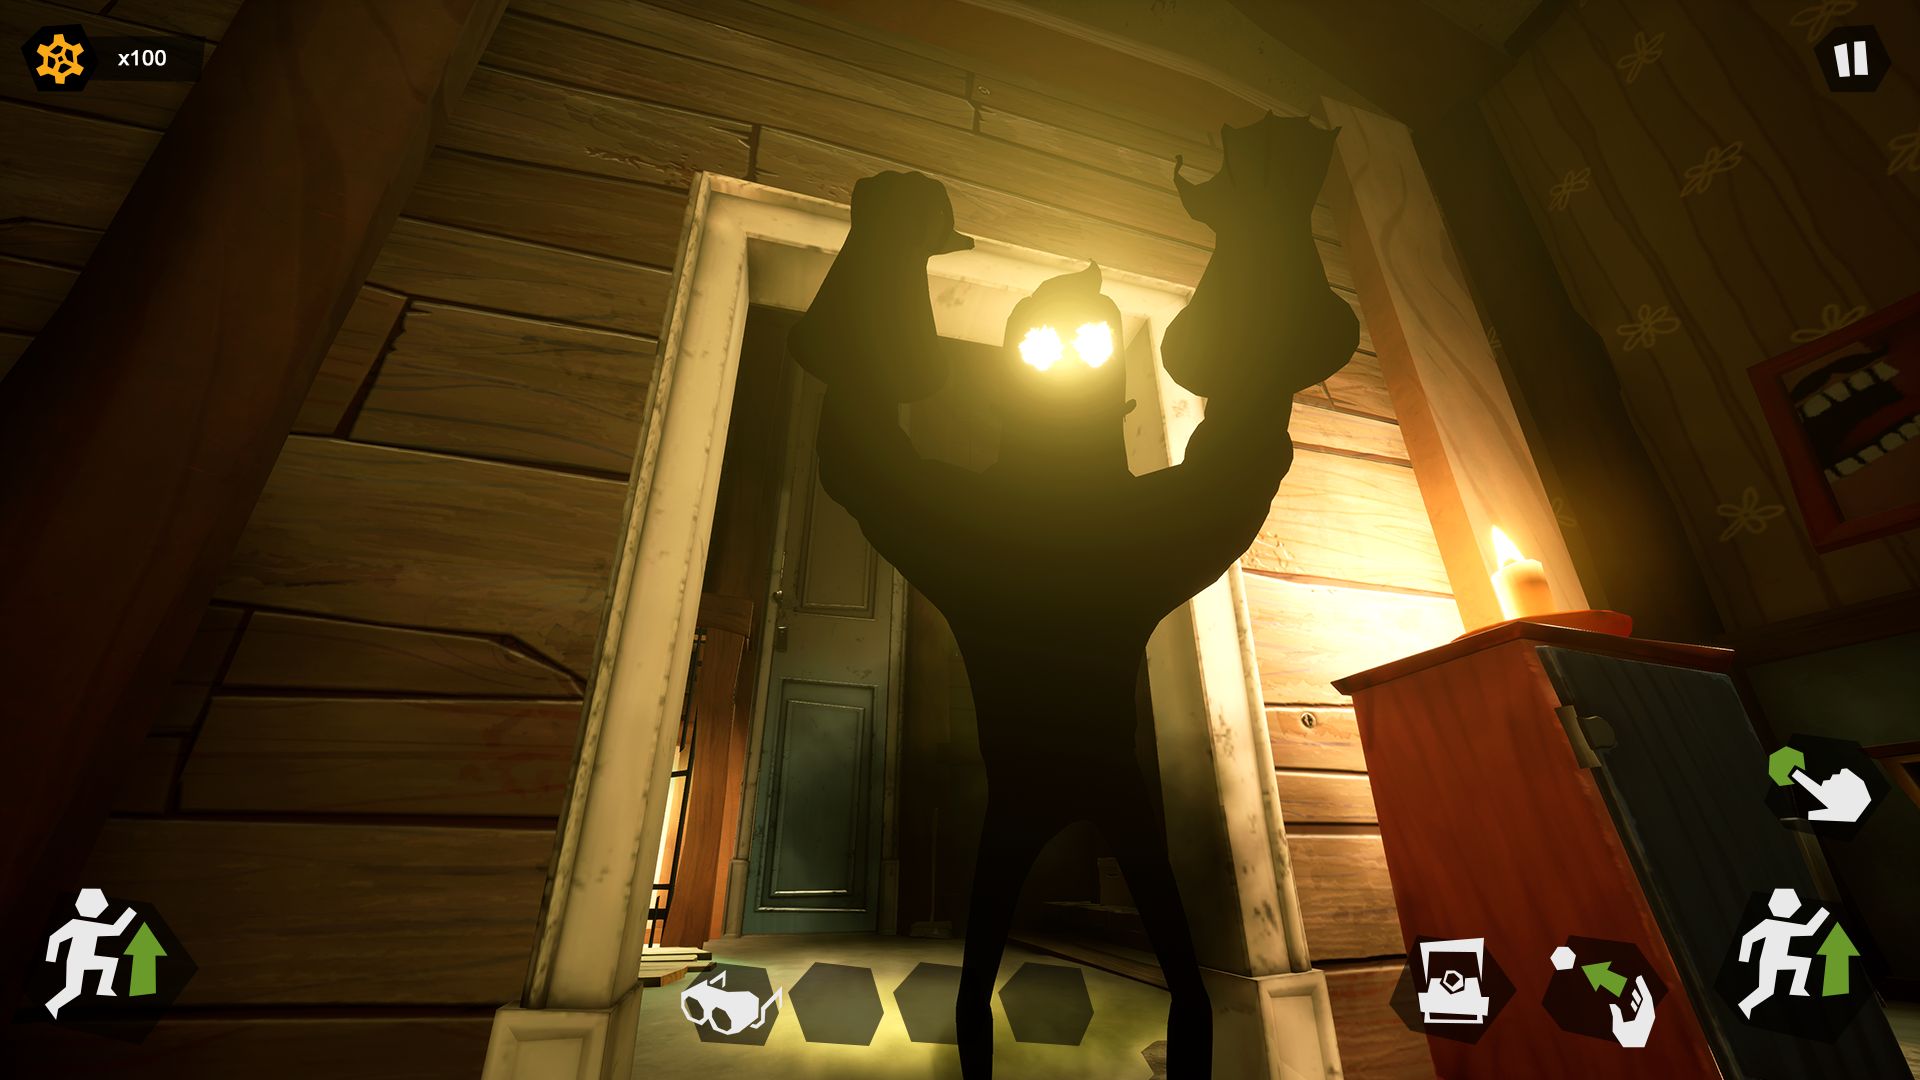 Hello Neighbor Nicky's Diaries - Android game screenshots.